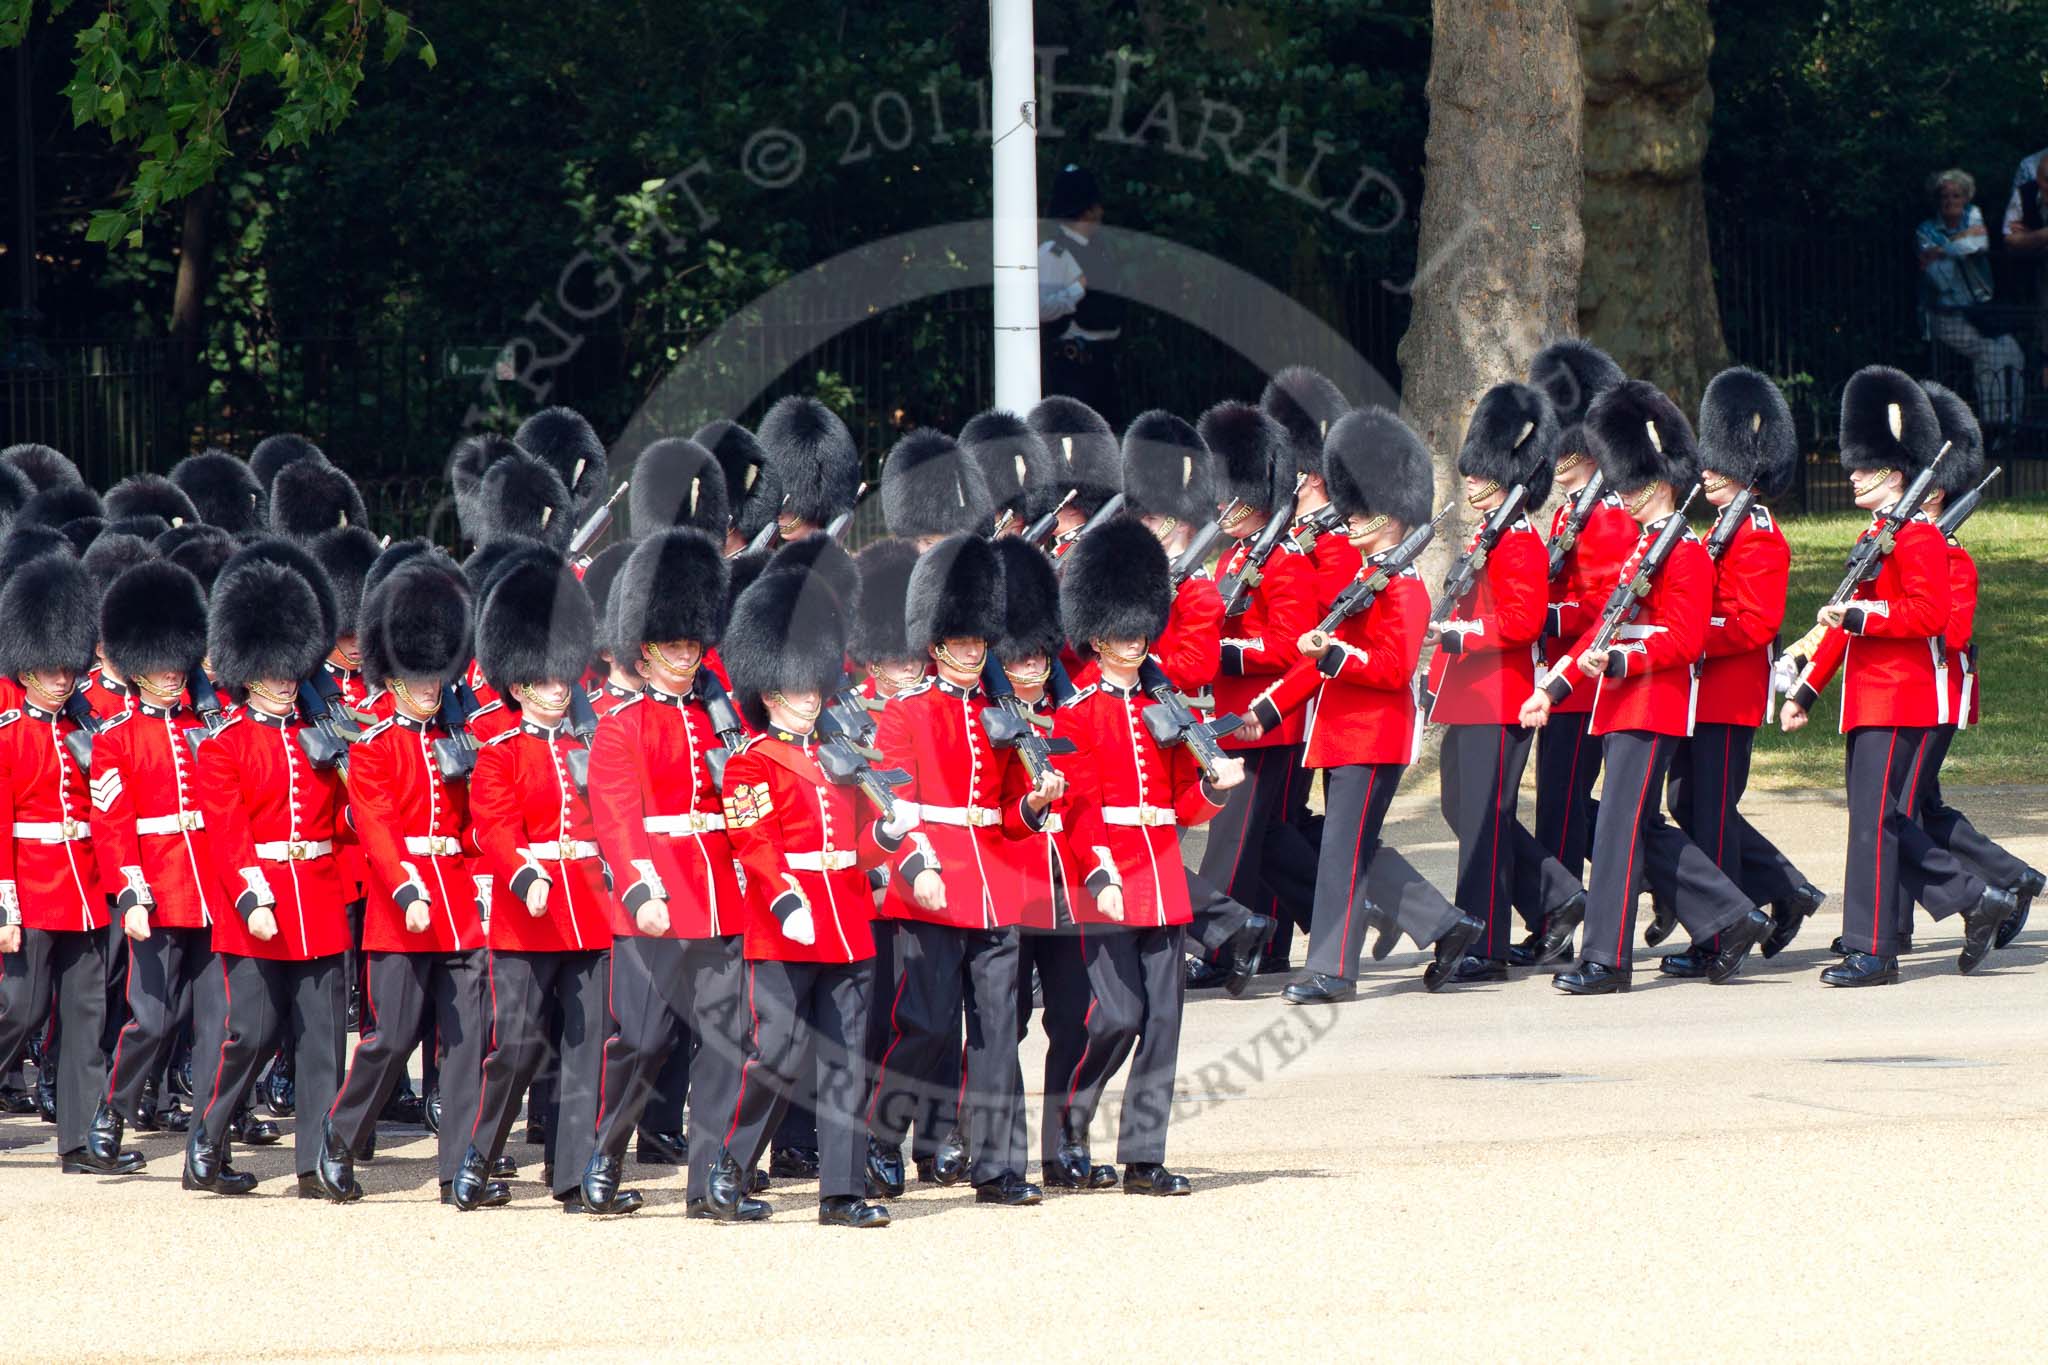 The Colonel's Review 2011: No. 4 Guard, Nijmegen Company Grenadier Guards, marching onto the parade ground..
Horse Guards Parade, Westminster,
London SW1,

United Kingdom,
on 04 June 2011 at 10:27, image #27